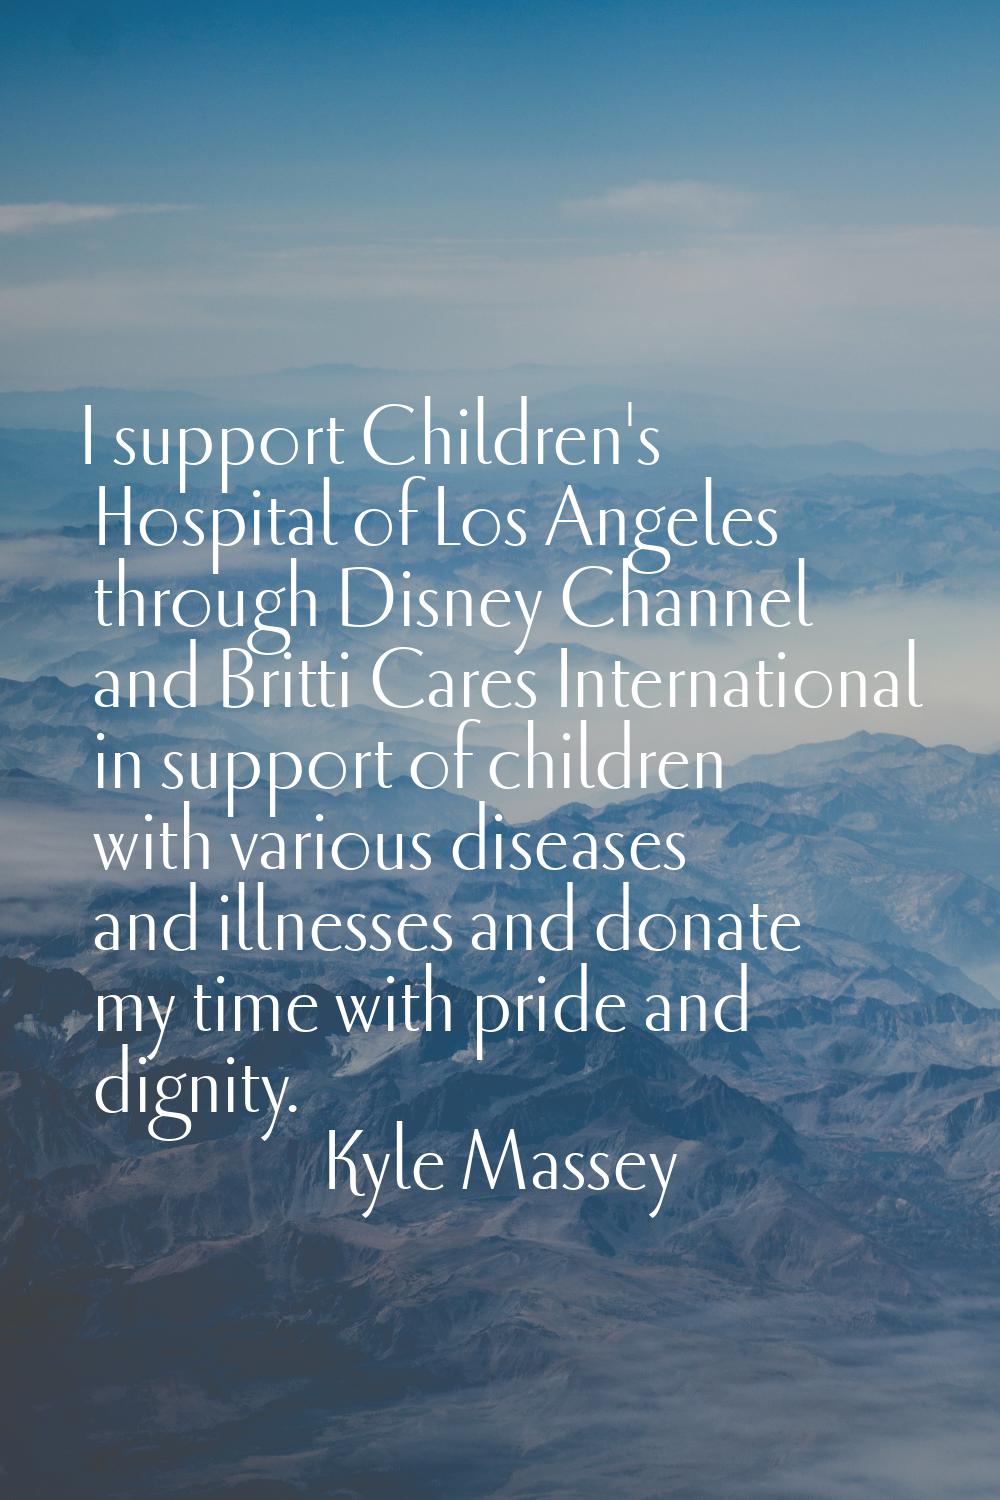 I support Children's Hospital of Los Angeles through Disney Channel and Britti Cares International 